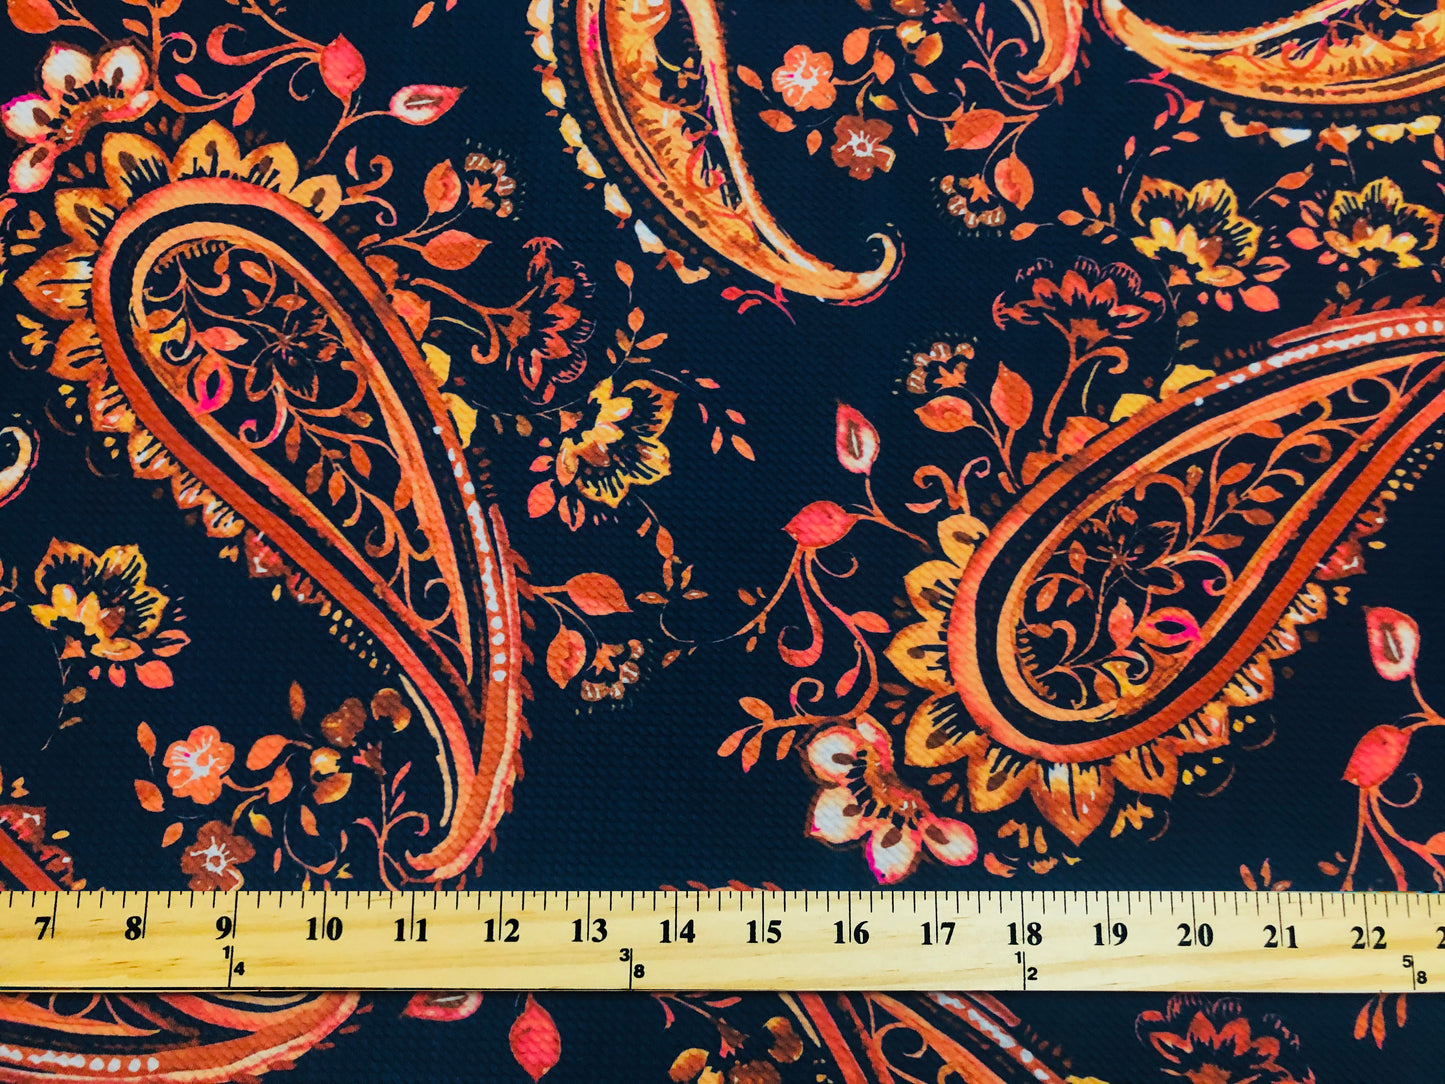 Bullet Knit Printed Fabric-Navy Blue Rust Orange Paisleys-BPR239-Sold by the Yard